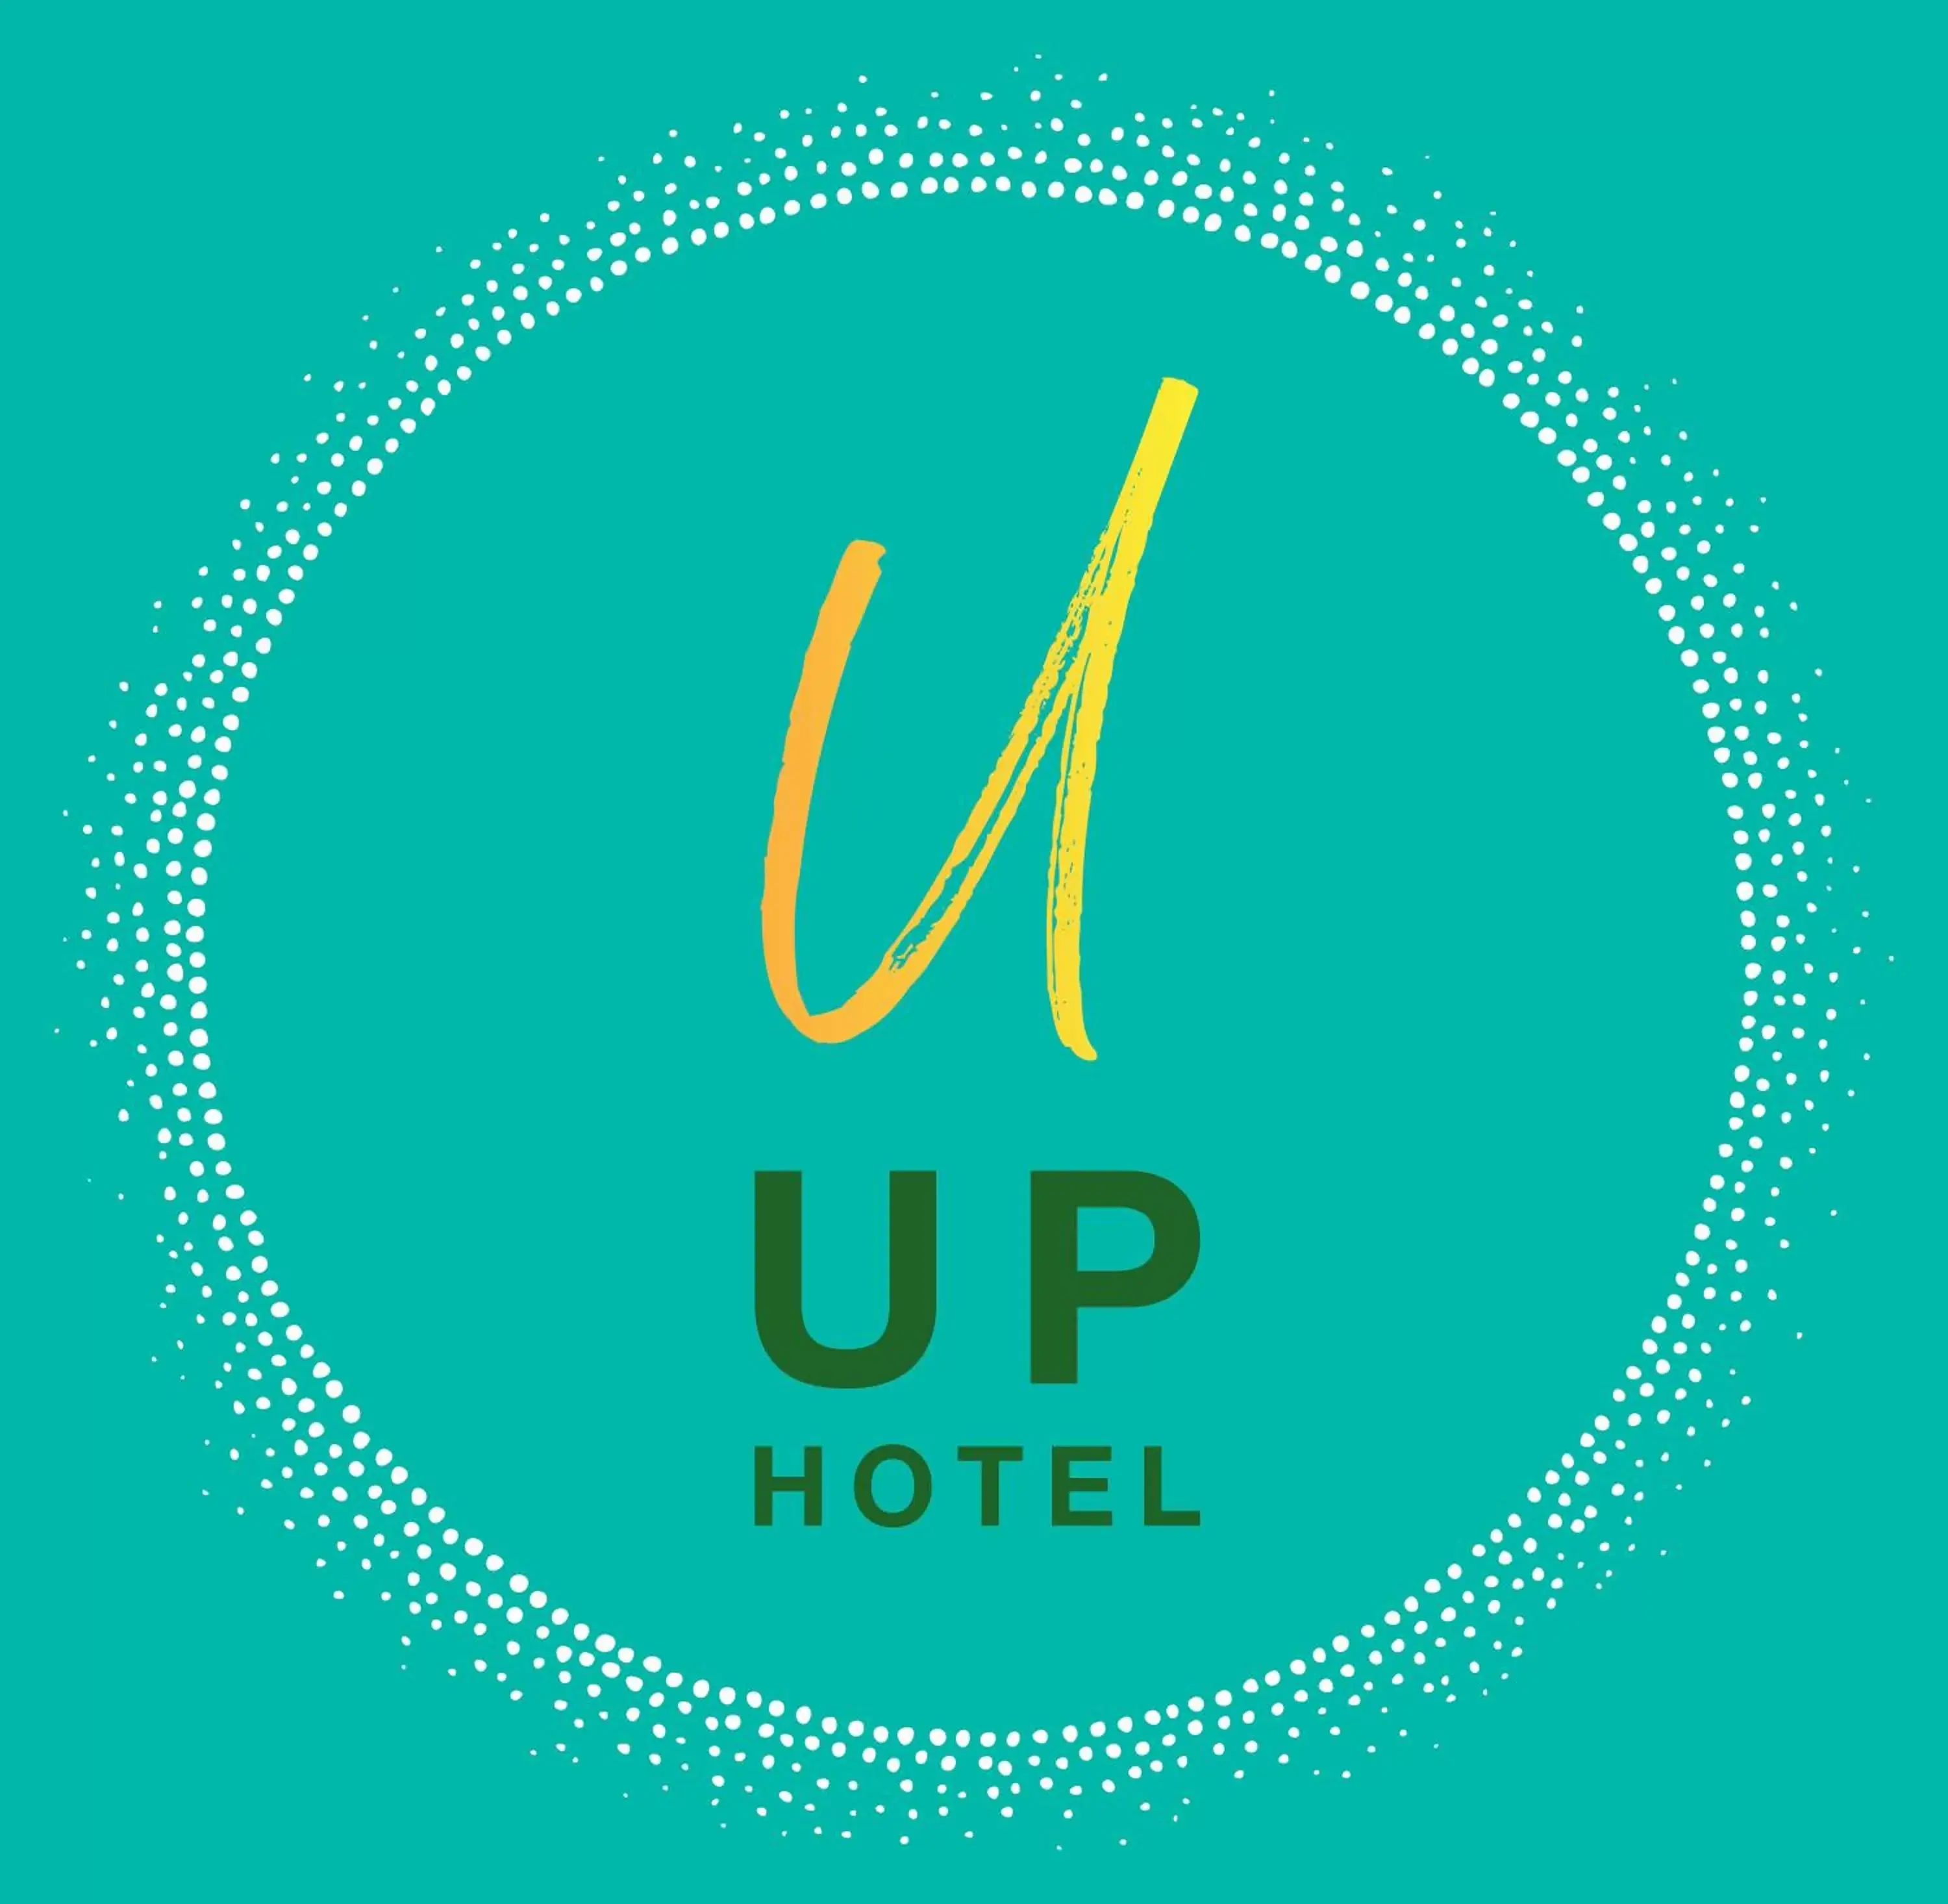 Logo/Certificate/Sign in Up Hotel